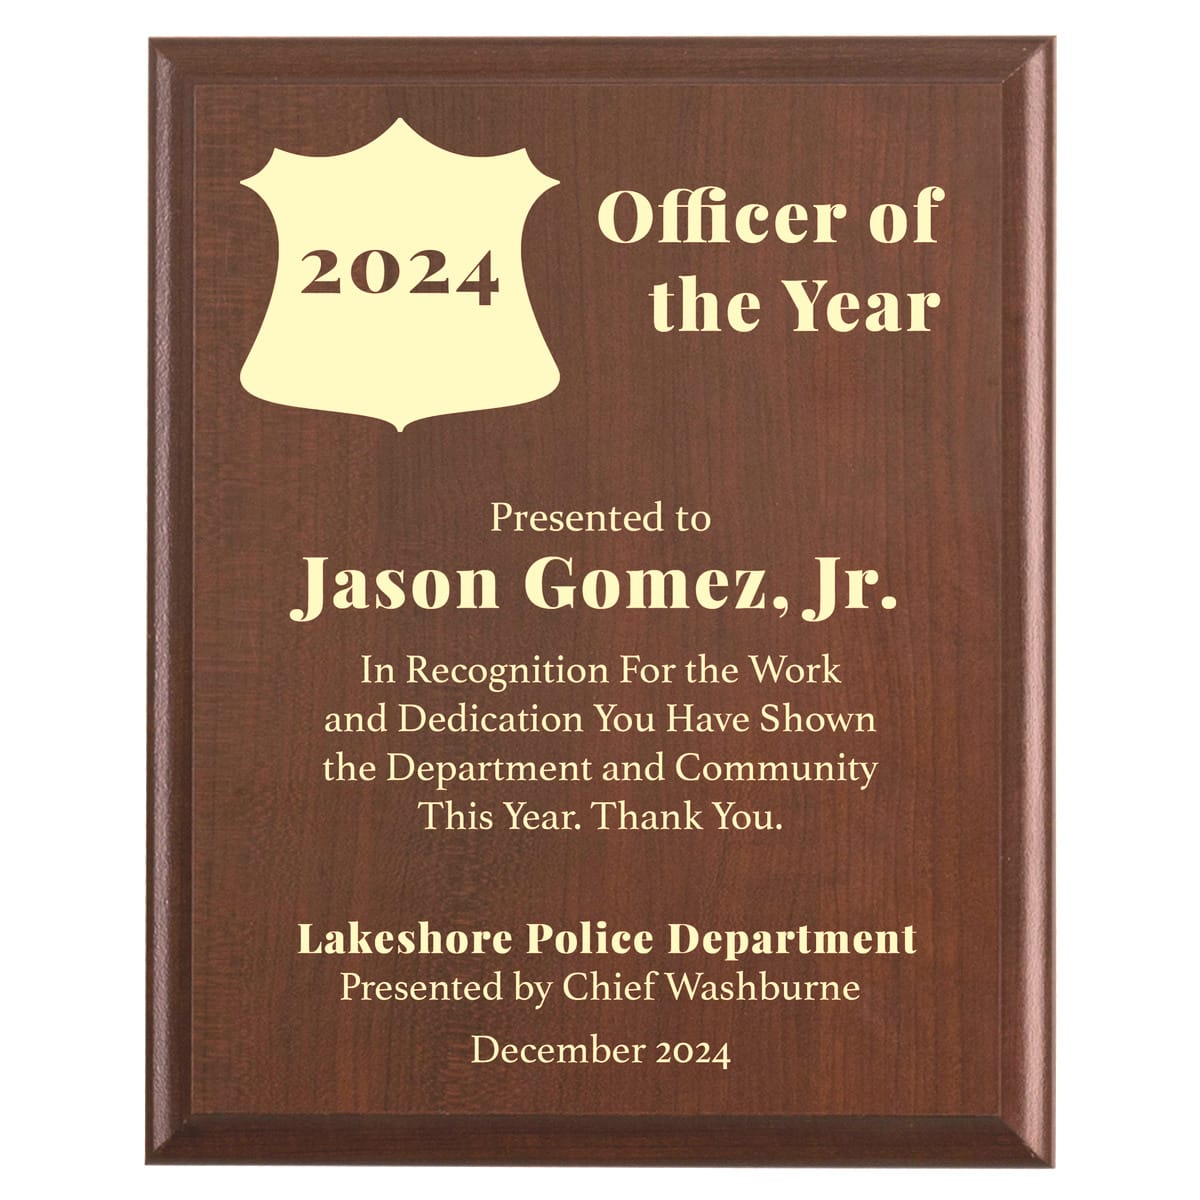 Plaque photo: Officer of the Year Award Plaque design with free personalization. Wood style finish with customized text.